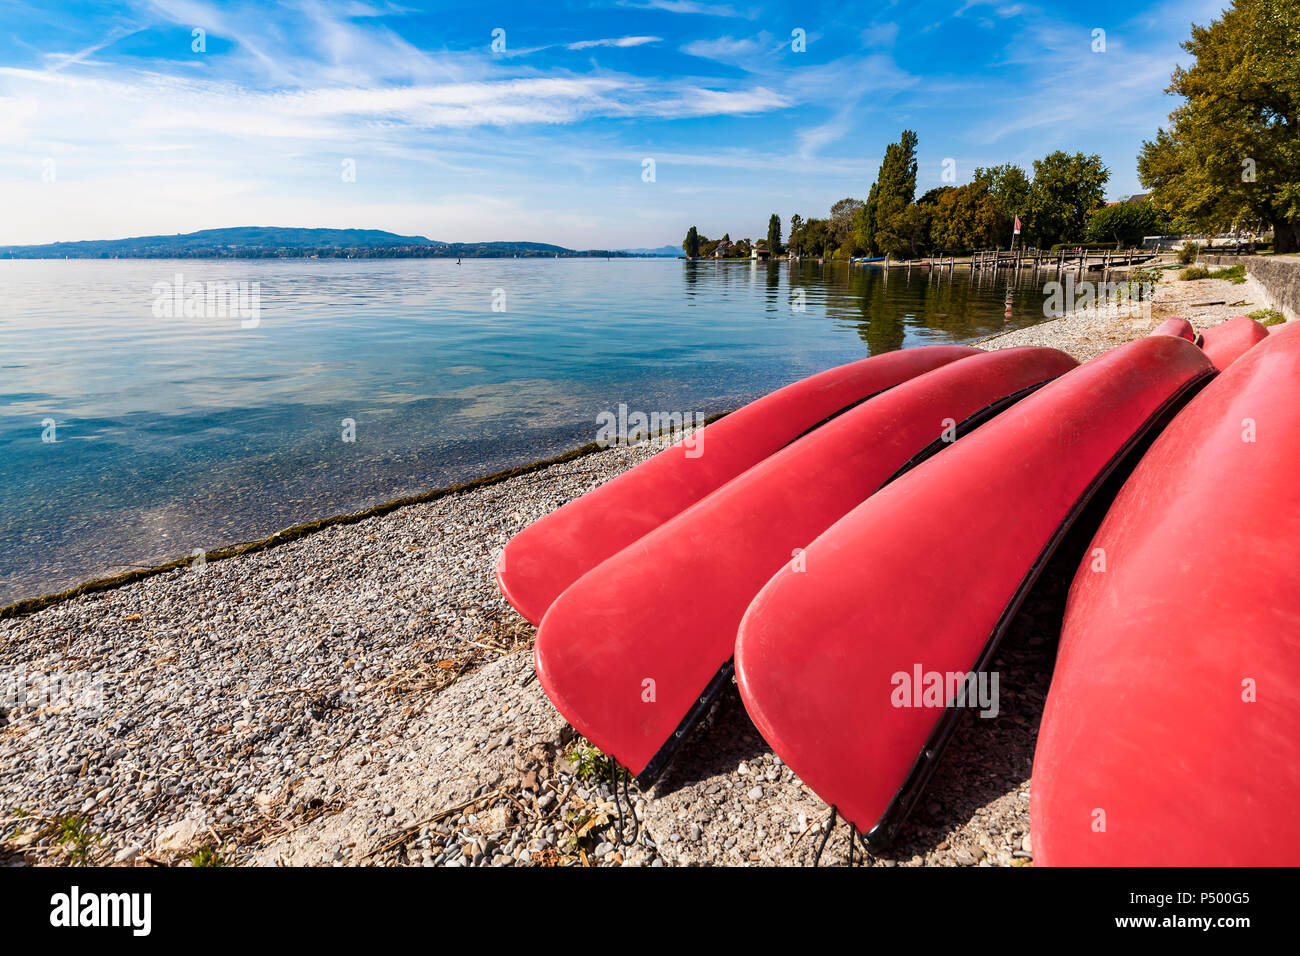 Germany, Constance district, Reichenau Island, lakeshore with Canadian canoes Stock Photo